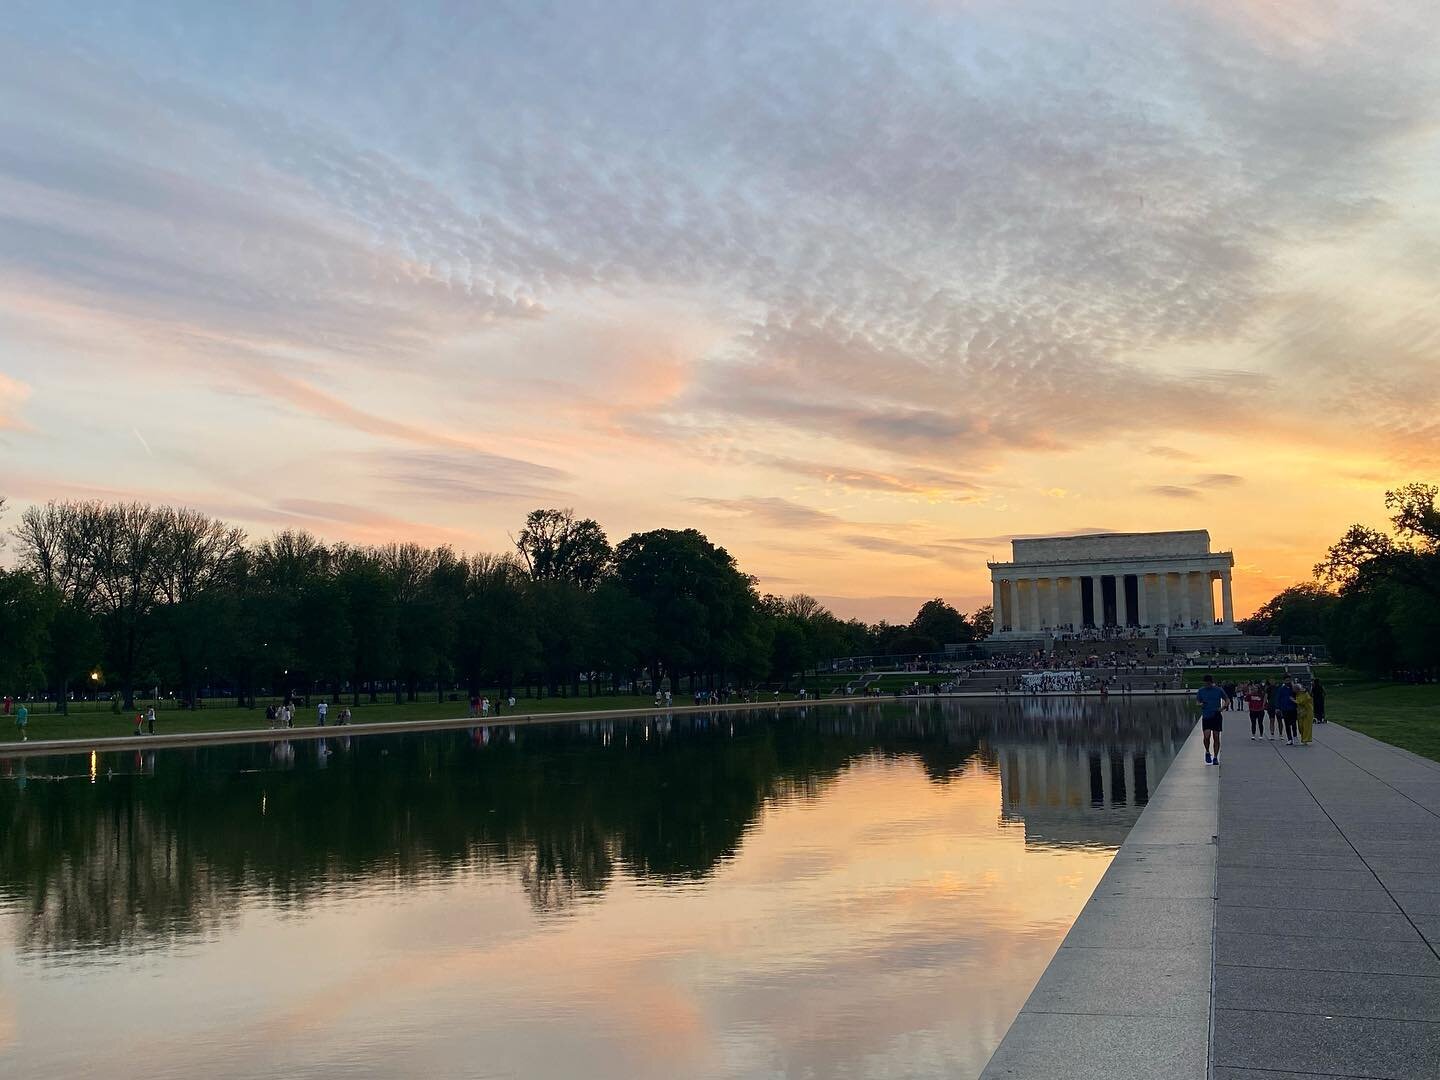 Sunday&rsquo;s sunset captured at the #lincolmemorial #reflectingpool with South African friends. 
.
When The sky reflects my mood.